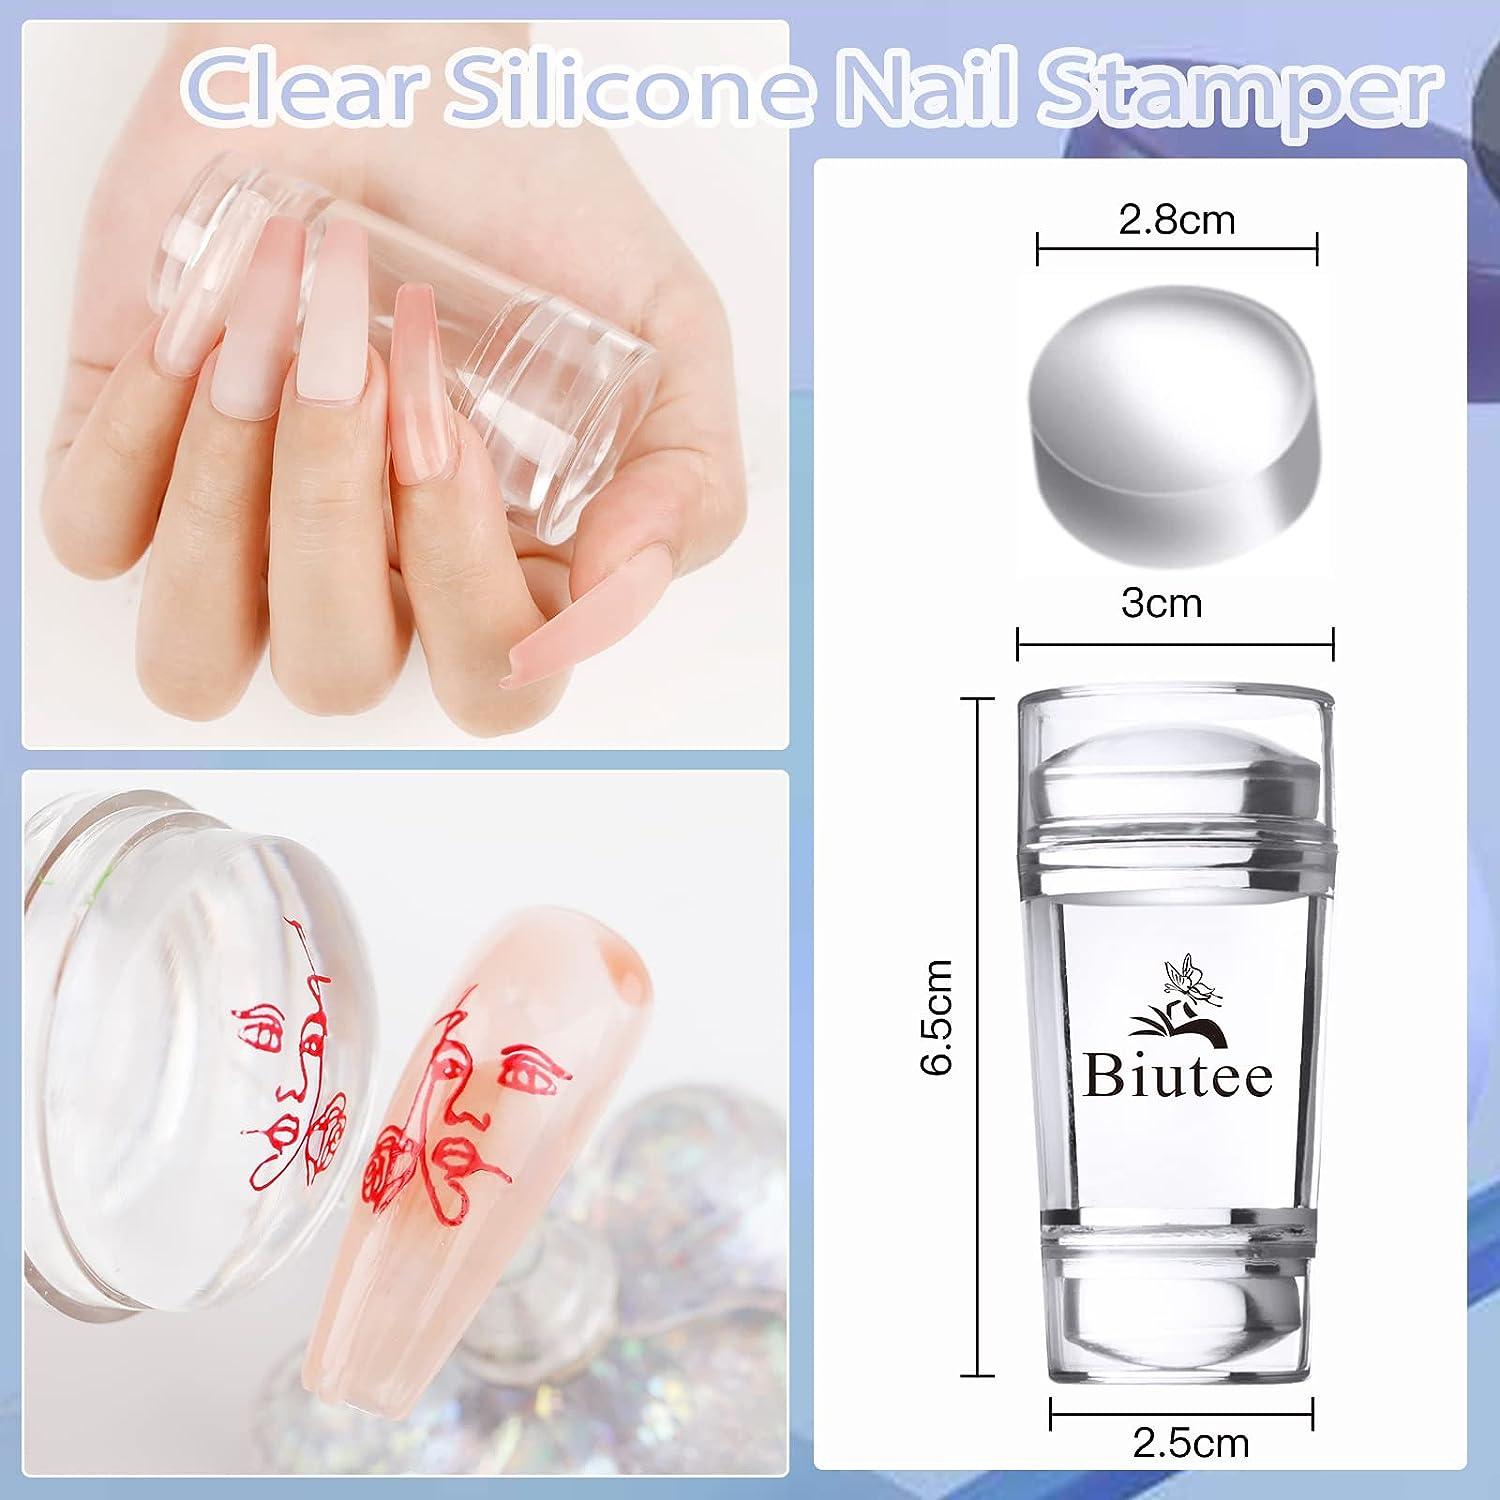 CLEAR SILICONE NAIL STAMPER — ATN Nail Supply